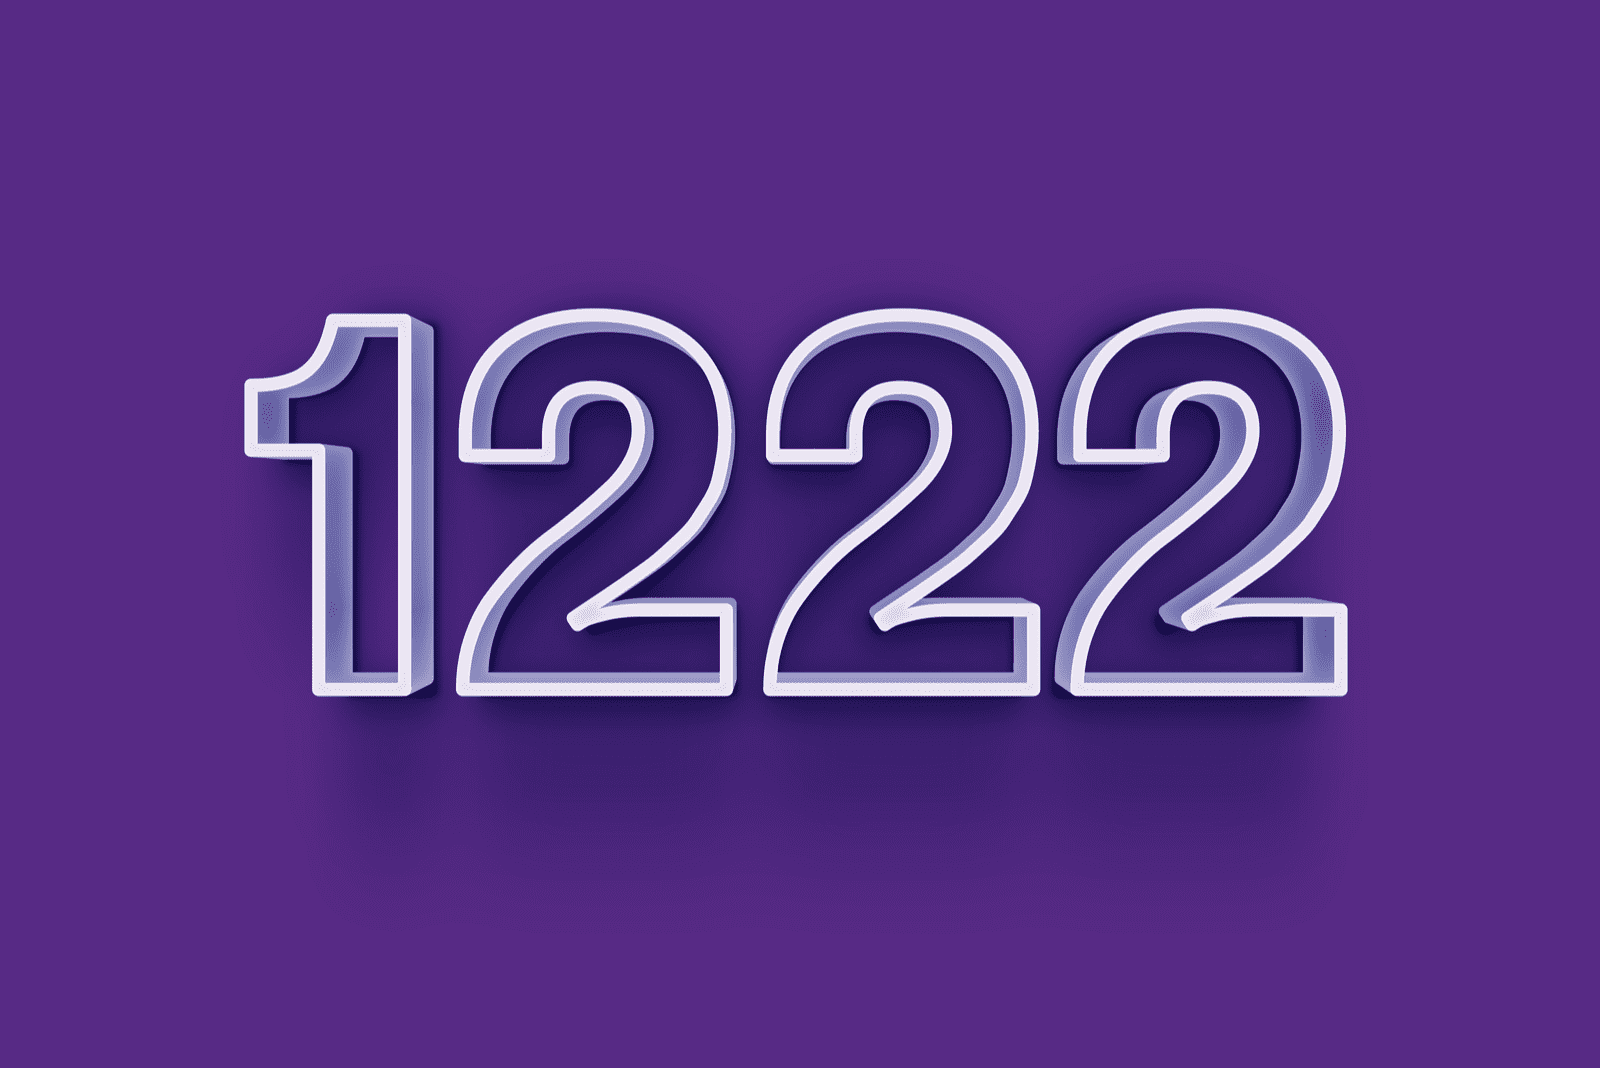 number 1222 on a purple background